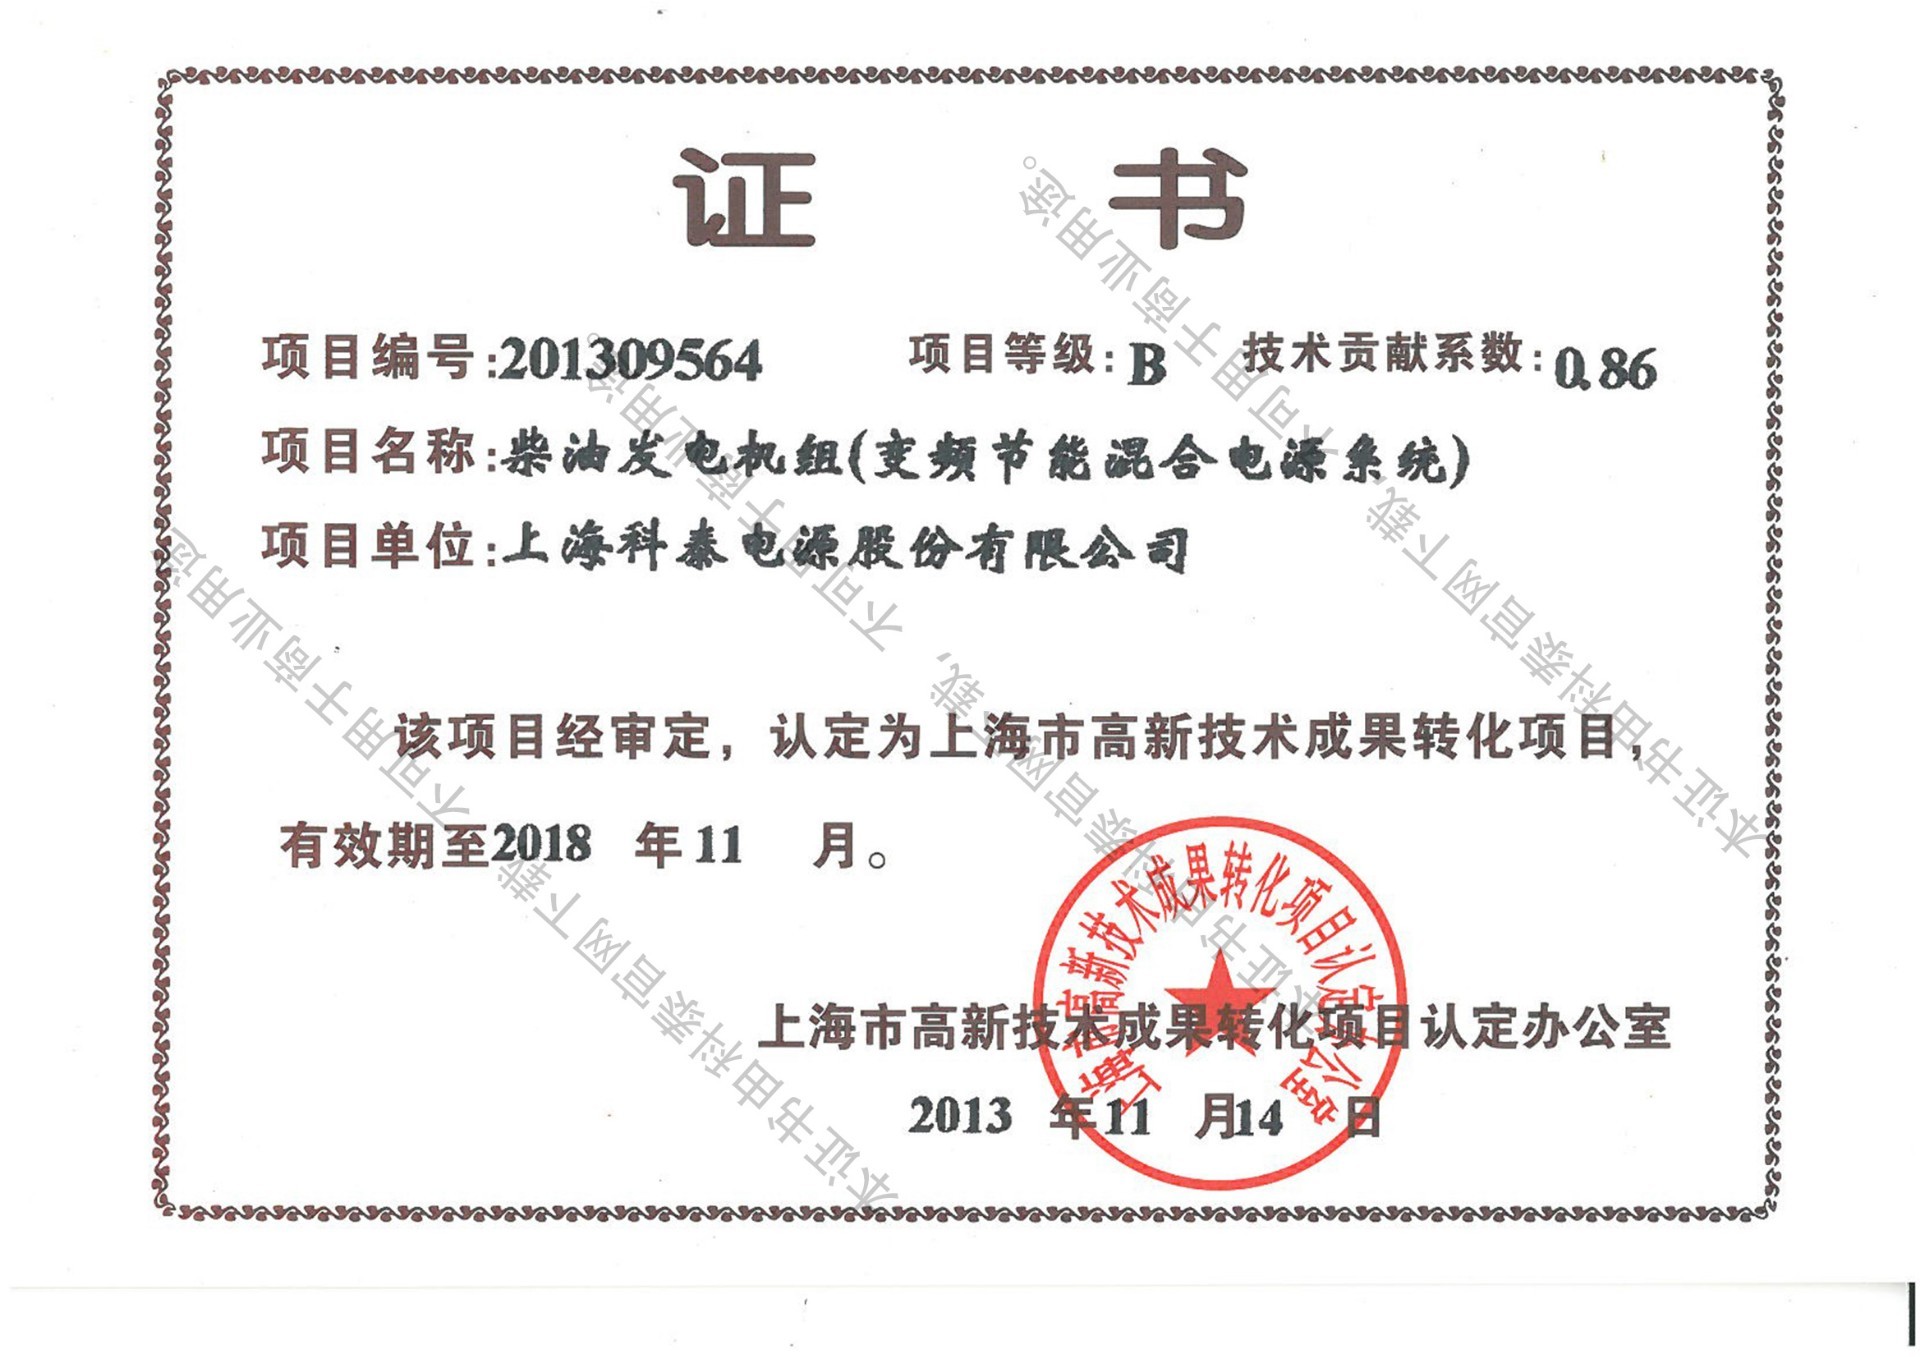 Registration certificate of computer software copyright (transferred)